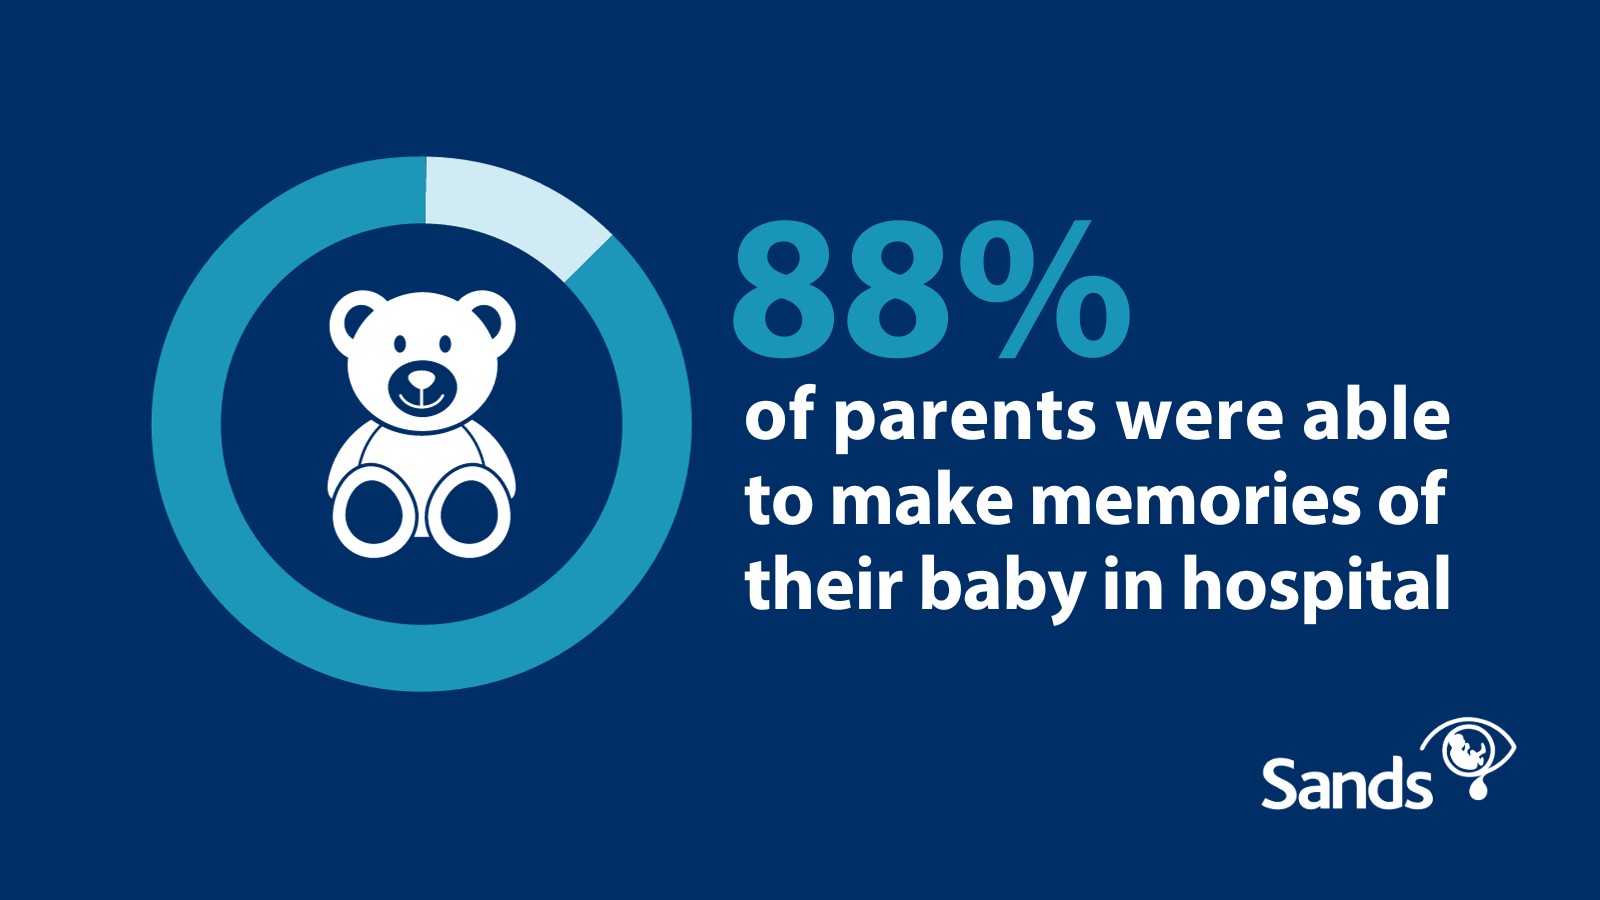 Image with text 88% of parents were able to make memories of their baby in hospital